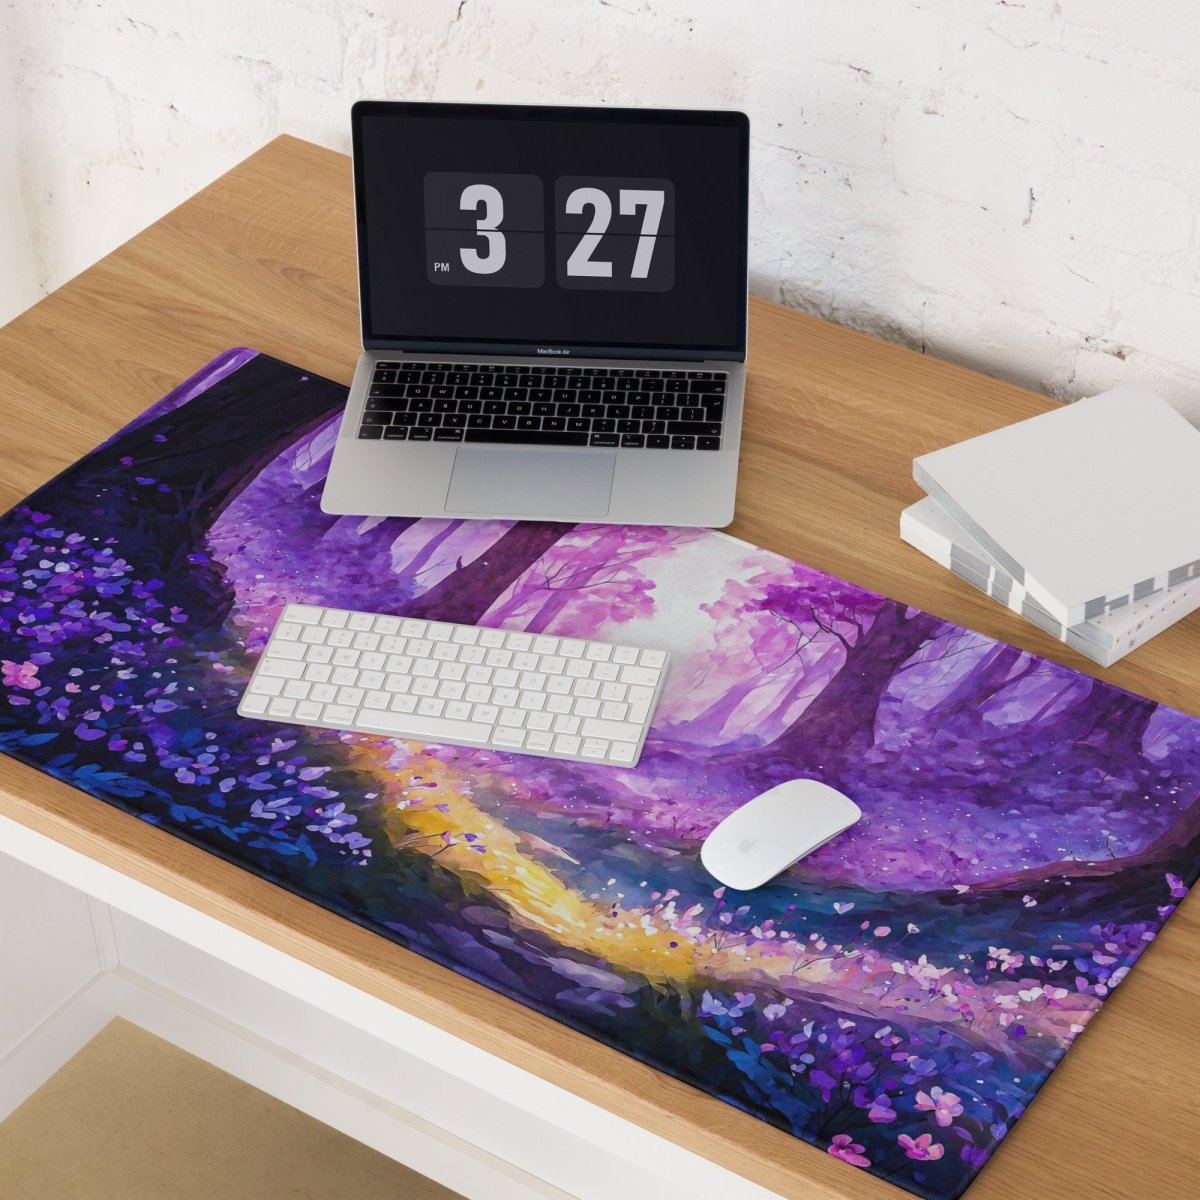 Blooming forest - Gaming mouse pad - Ever colorful